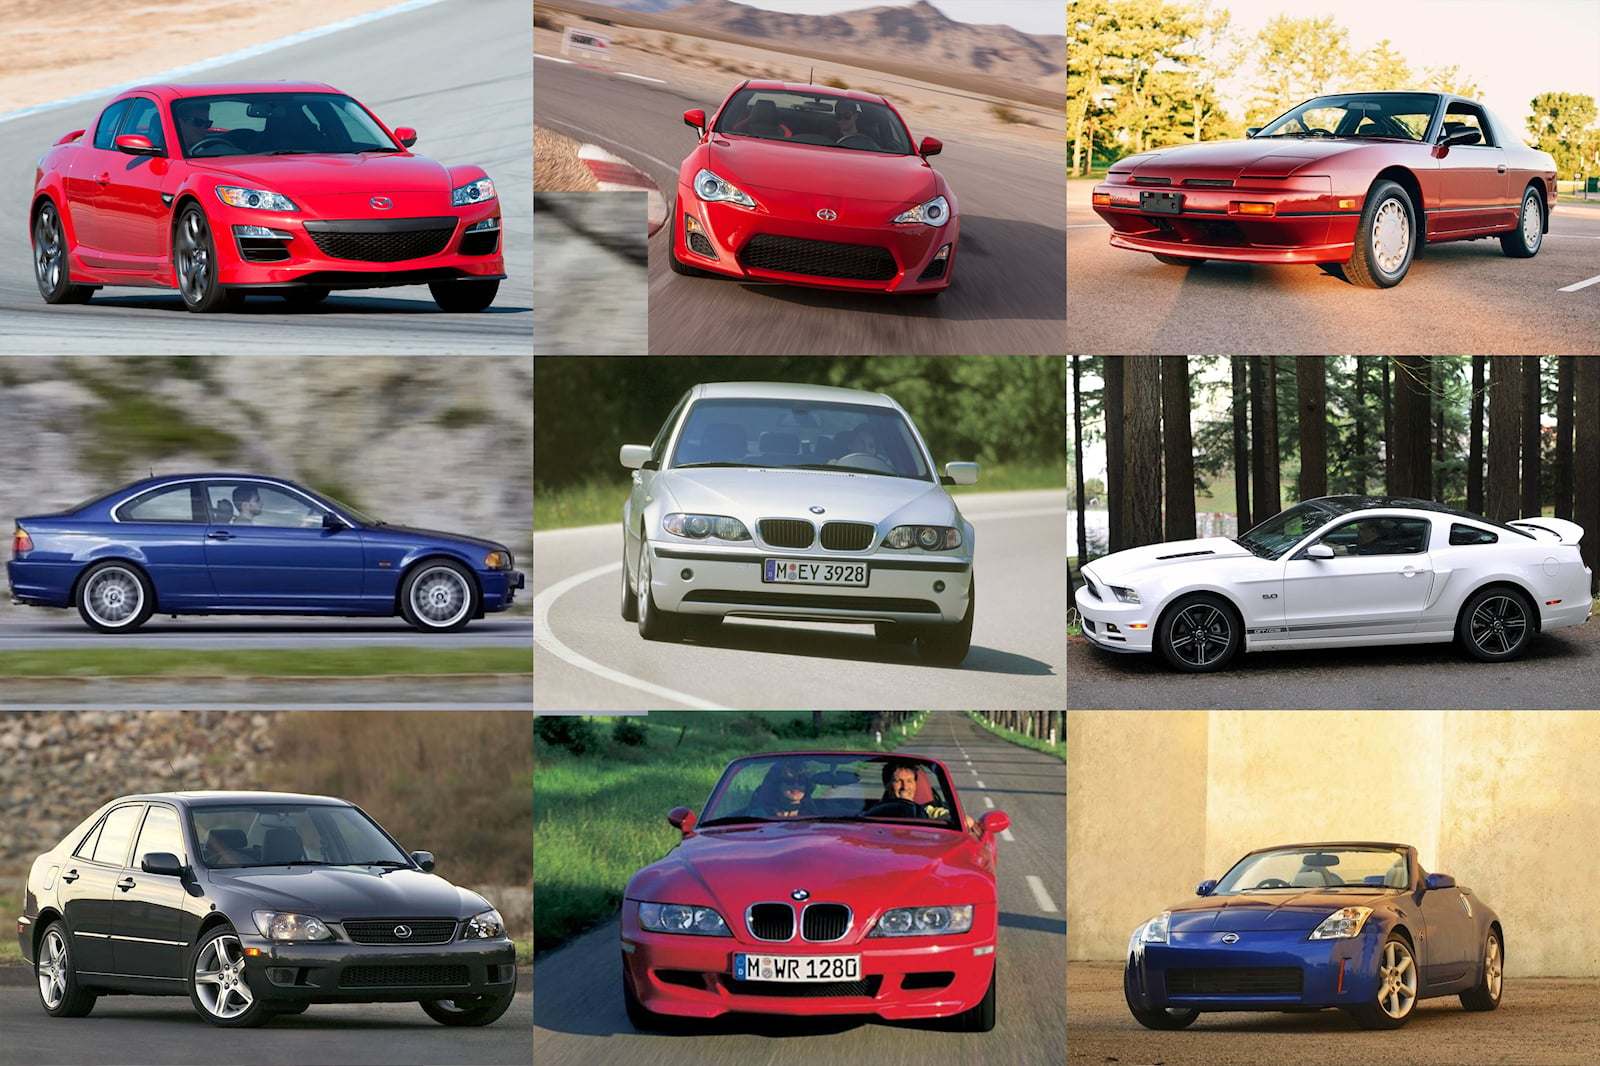 Cheapest Drift Cars To Get Into The Sport